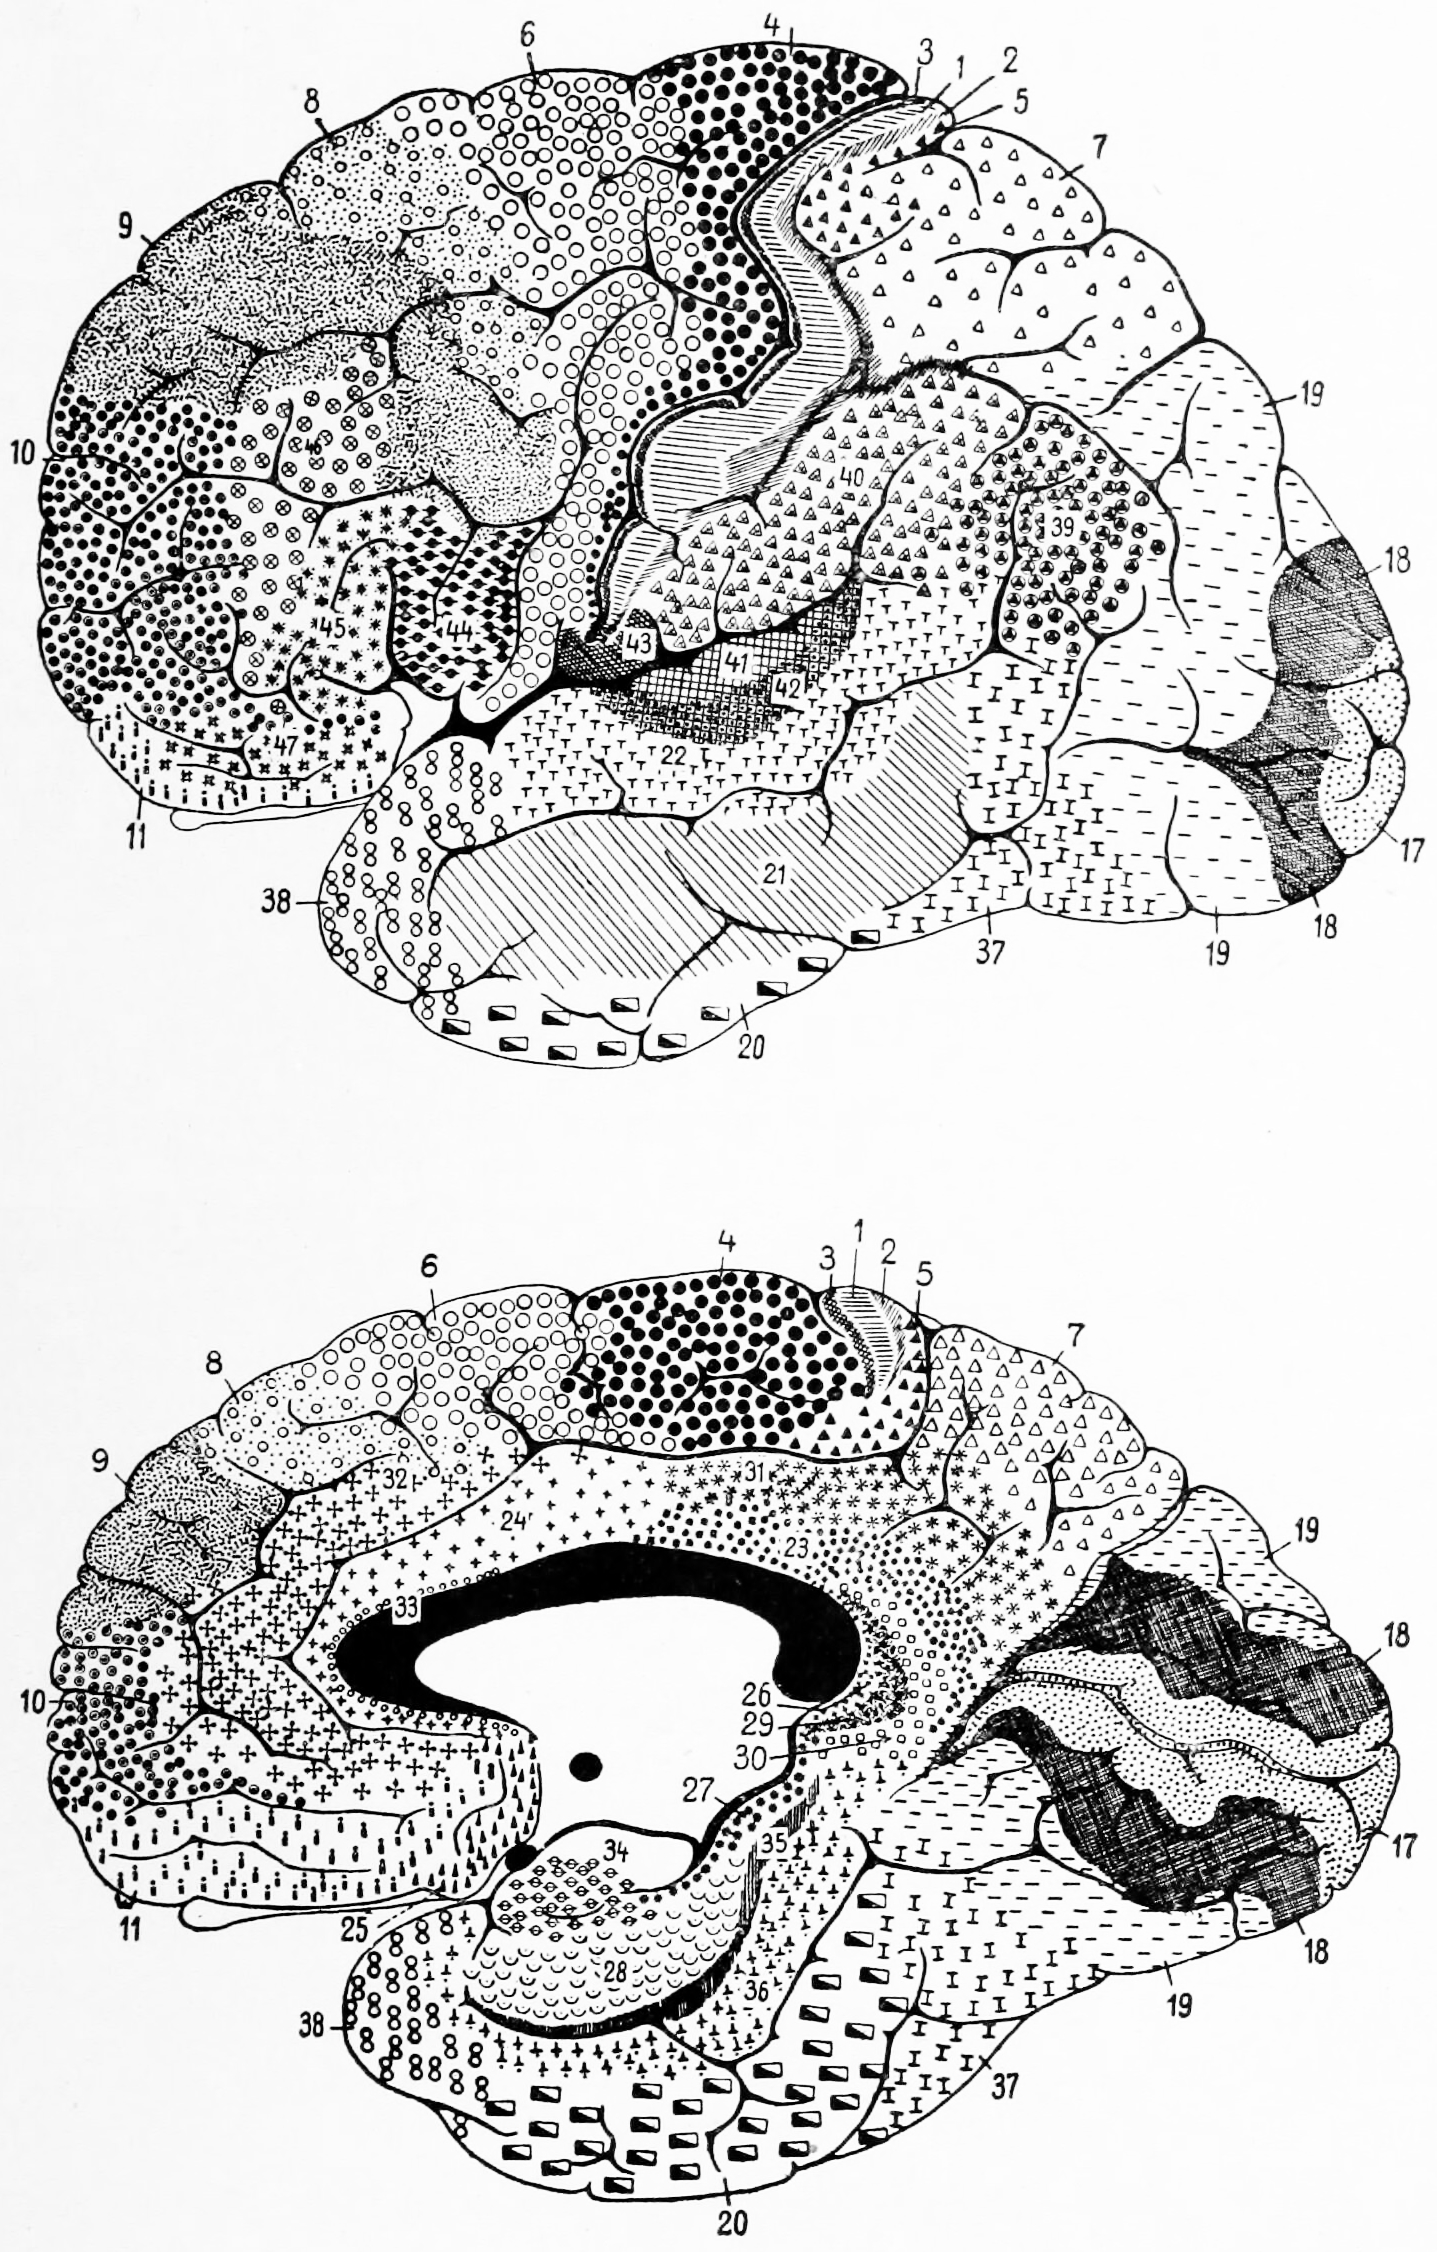 Brodmann’s diagram of the cerebral cortex showing the 52 distinct cytoarchitectonic areas he identified